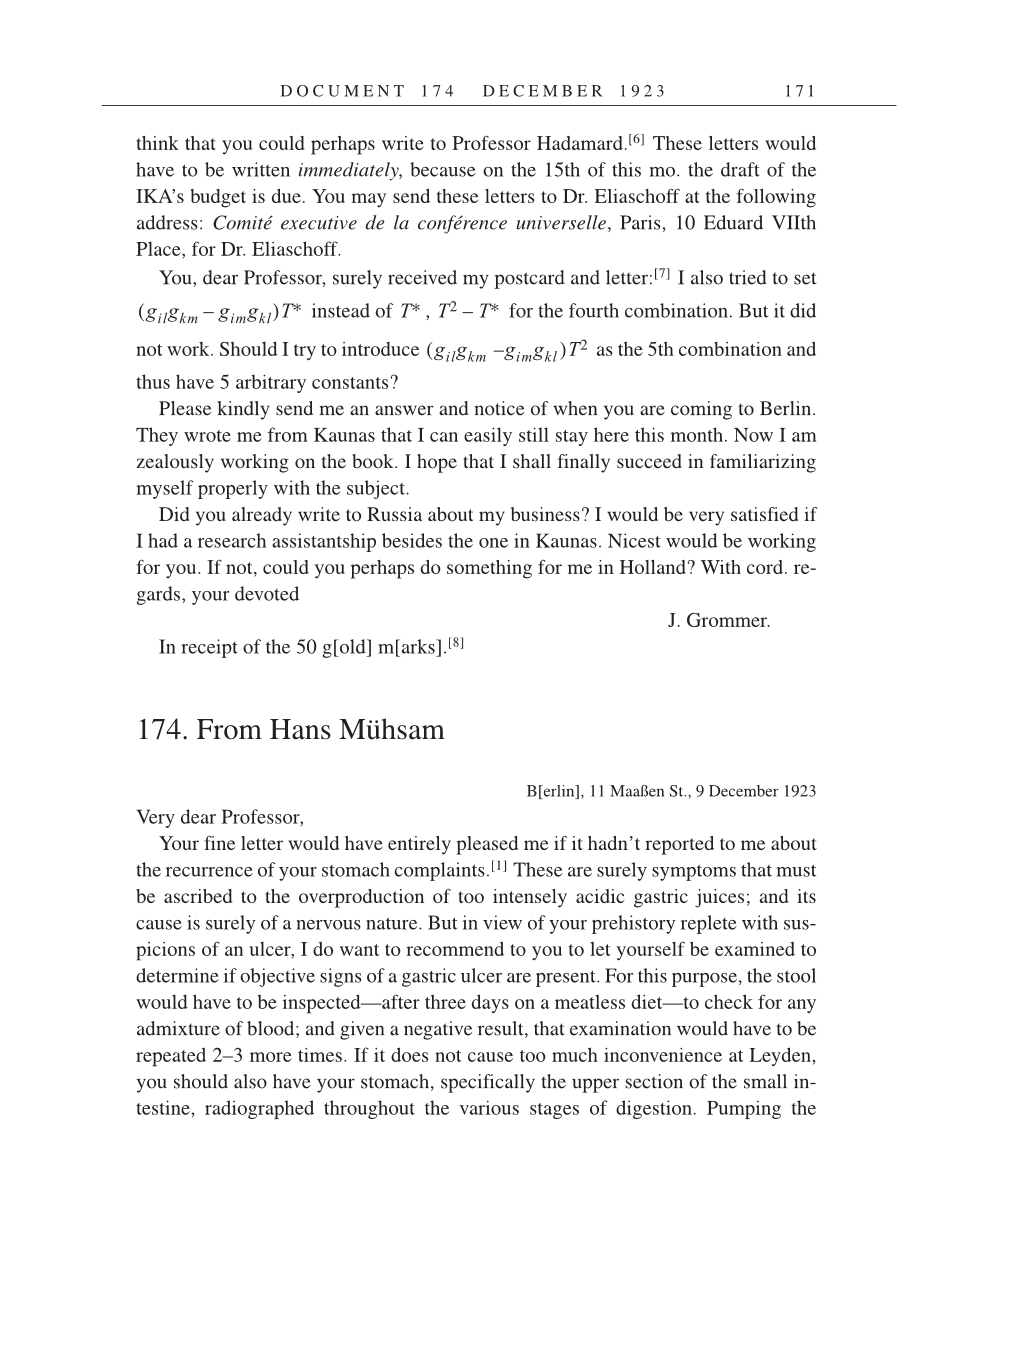 Volume 14: The Berlin Years: Writings & Correspondence, April 1923-May 1925 (English Translation Supplement) page 171